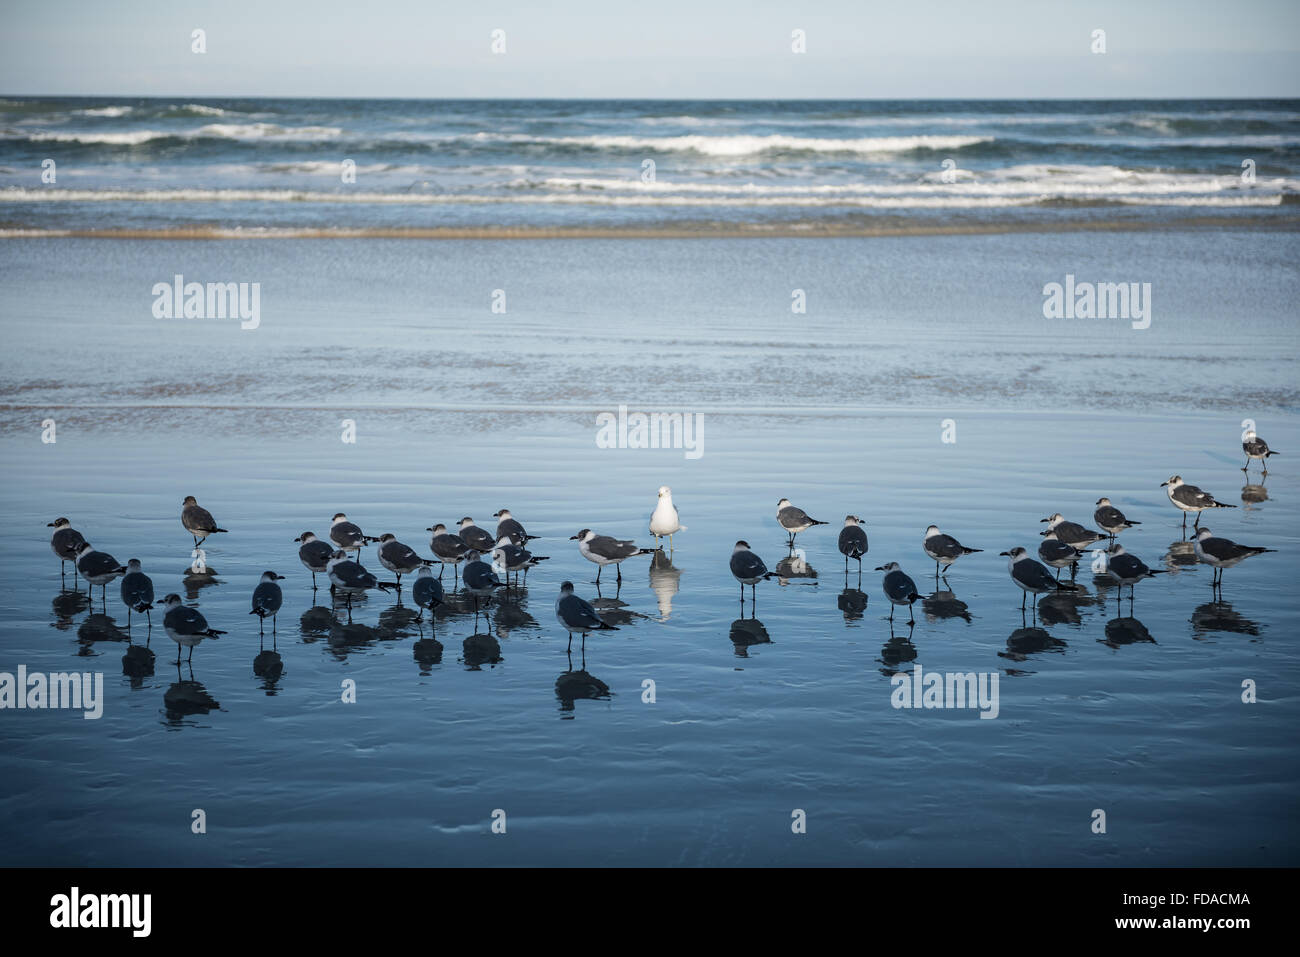 A lone white ring-billed gull standing amongst a flock of black and white laughing gulls on the shore, Daytona Beach, Florida. Stock Photo